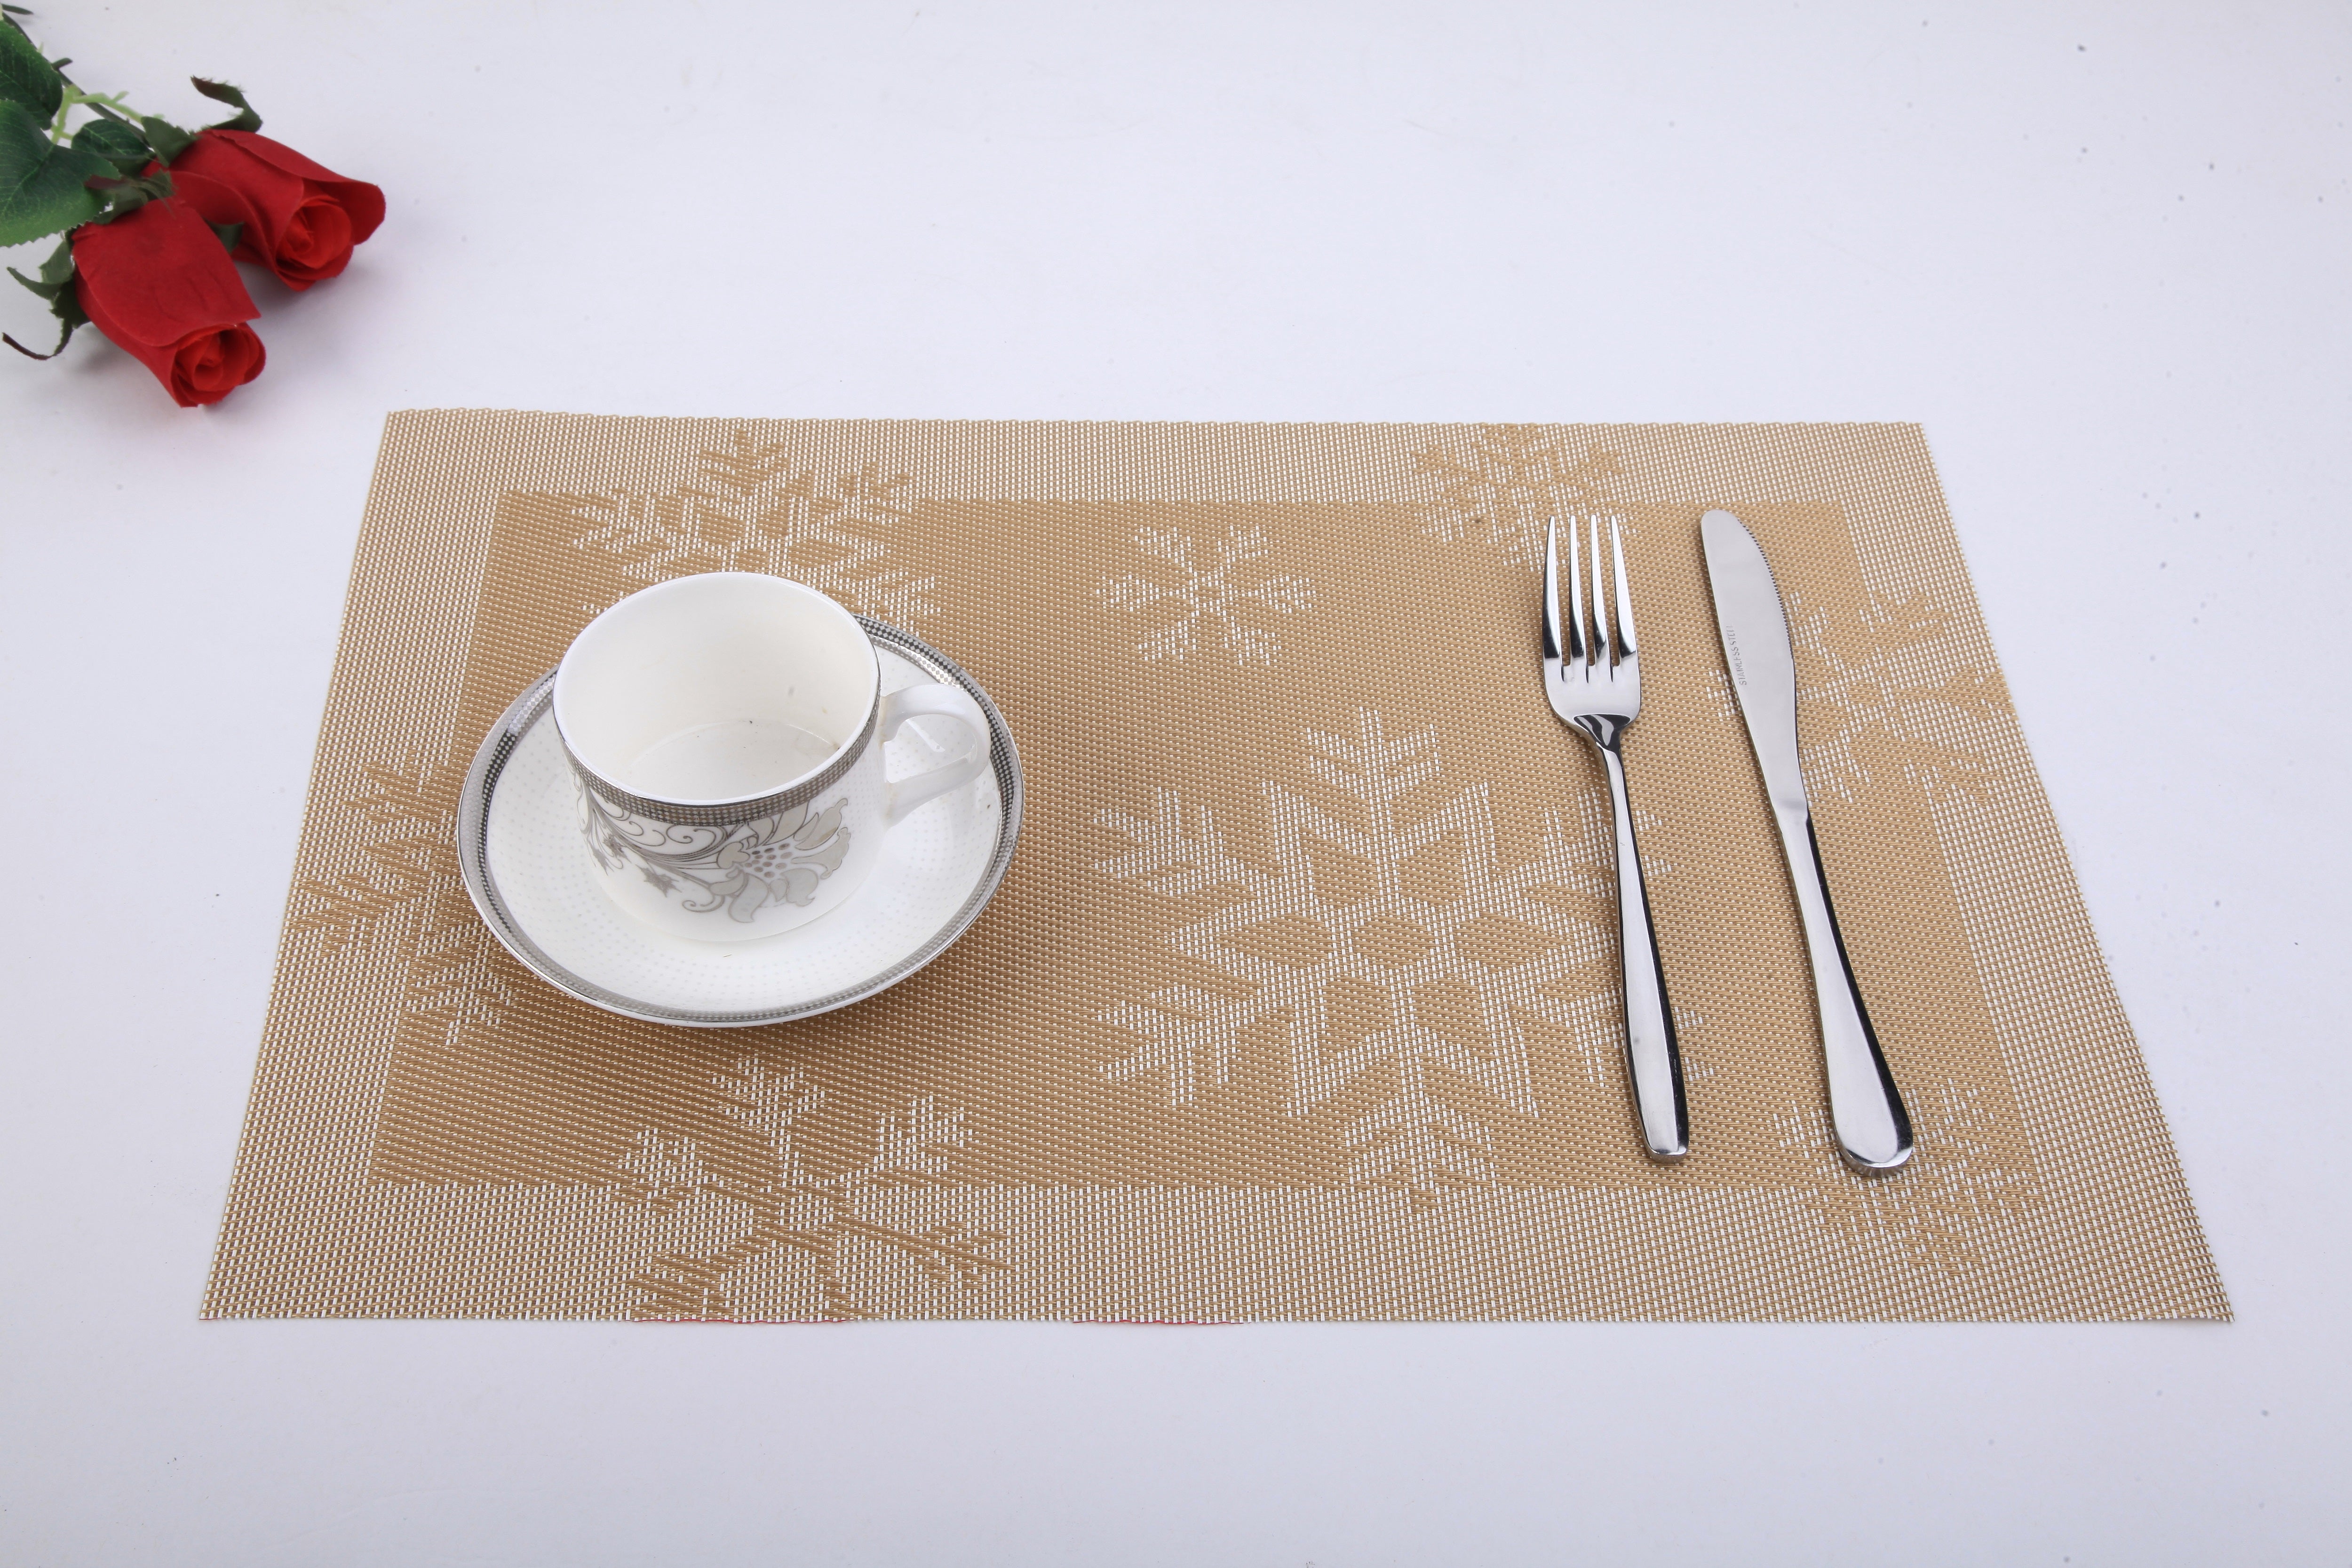 Golden Snowflakes Jacquard 12" x 18" In. Woven Non-Slip Washable Placemat Set of 4